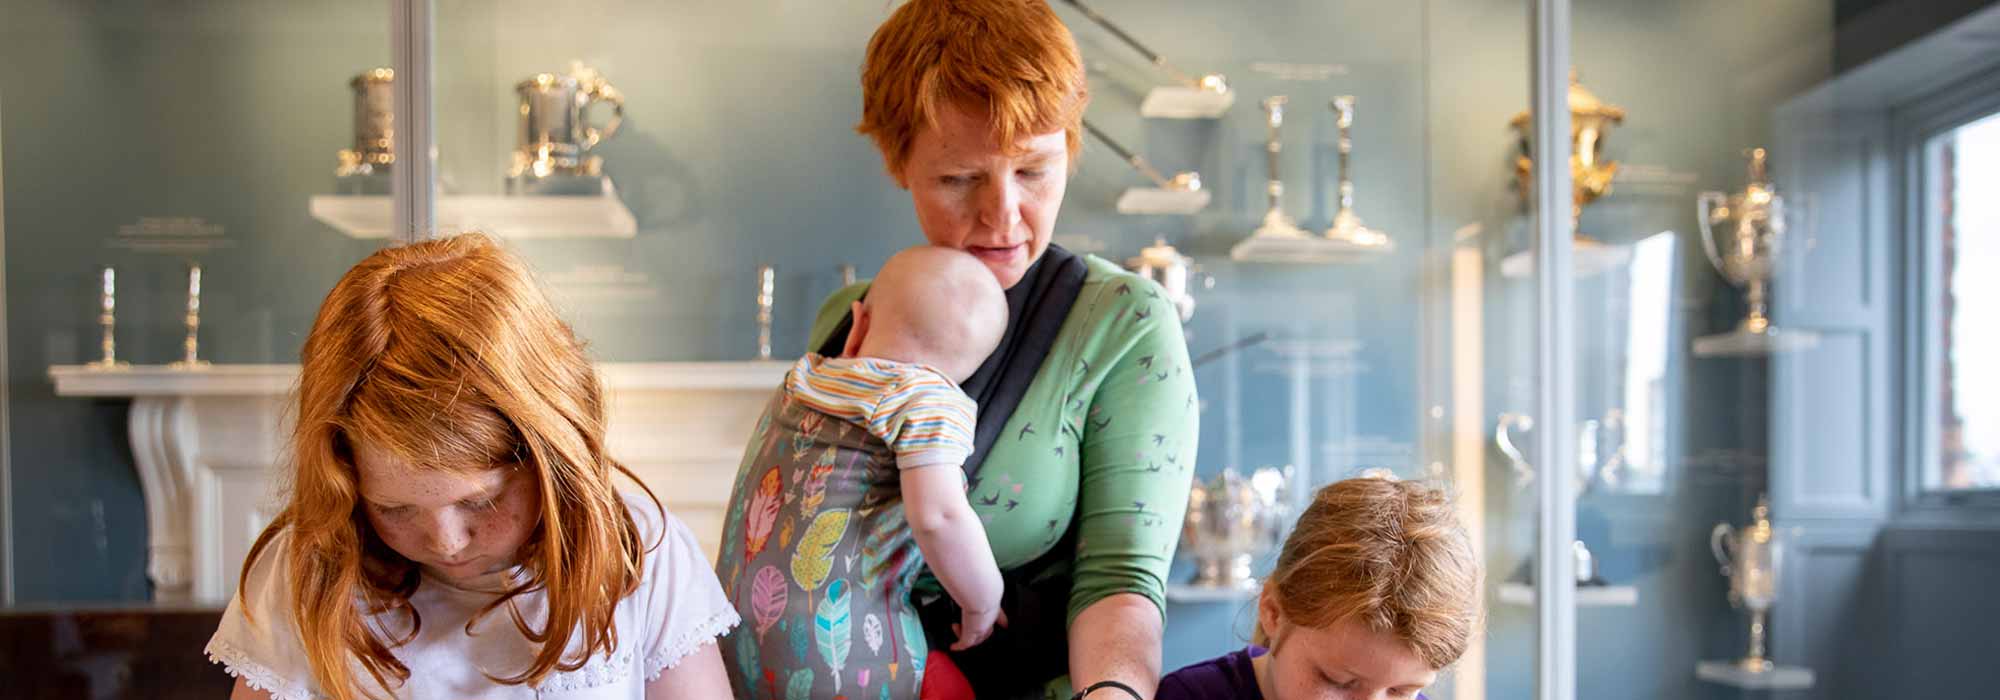 A lady with a baby in a baby carrier helps two young children to complete a task at a table.